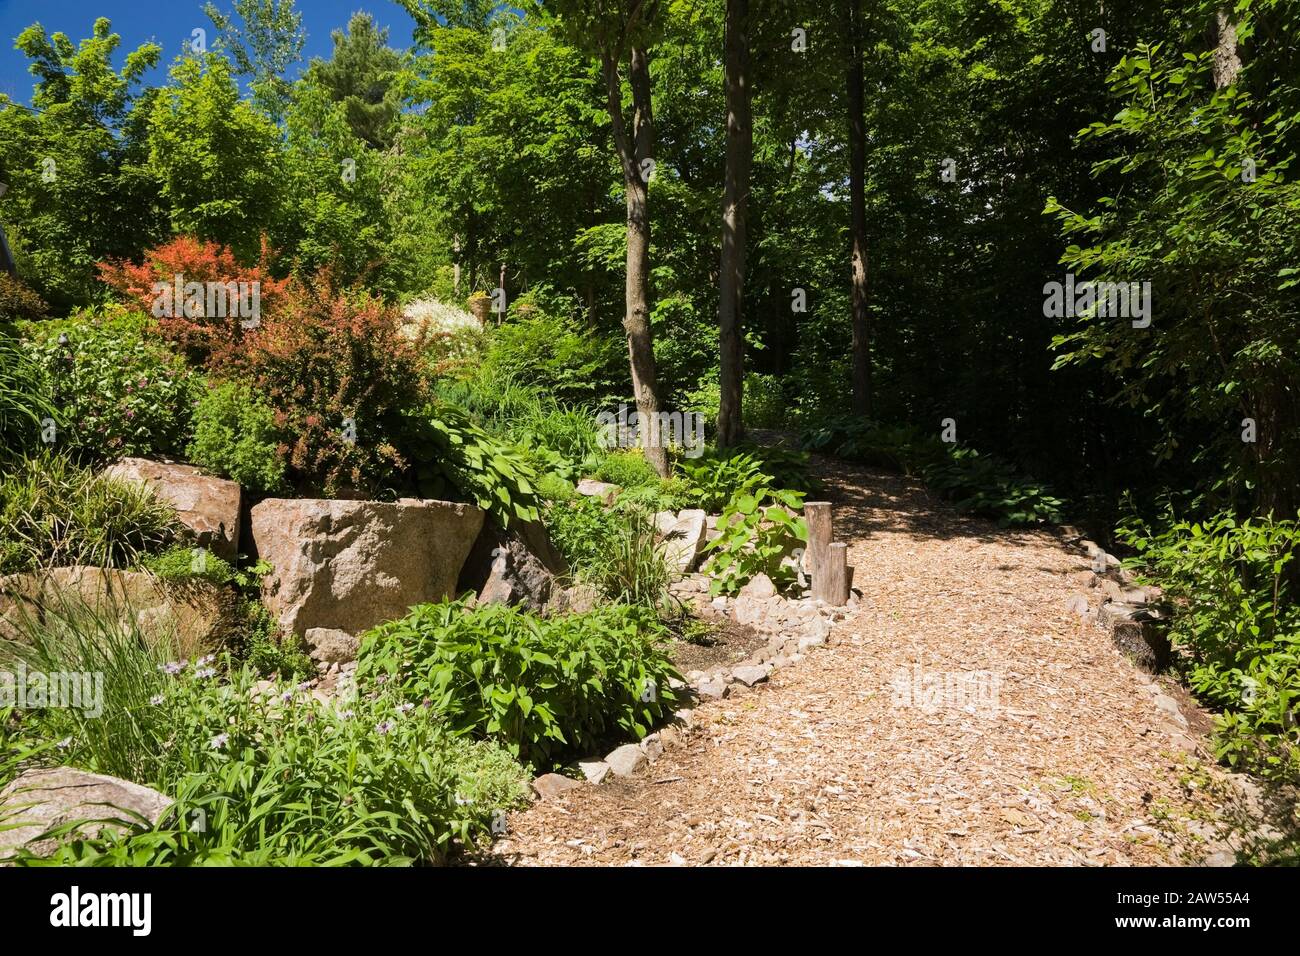 Mulch path edged with rocks leading to woodland and border planted with perennial plants, shrubs, flowers and Hosta in backyard garden in spring. Stock Photo